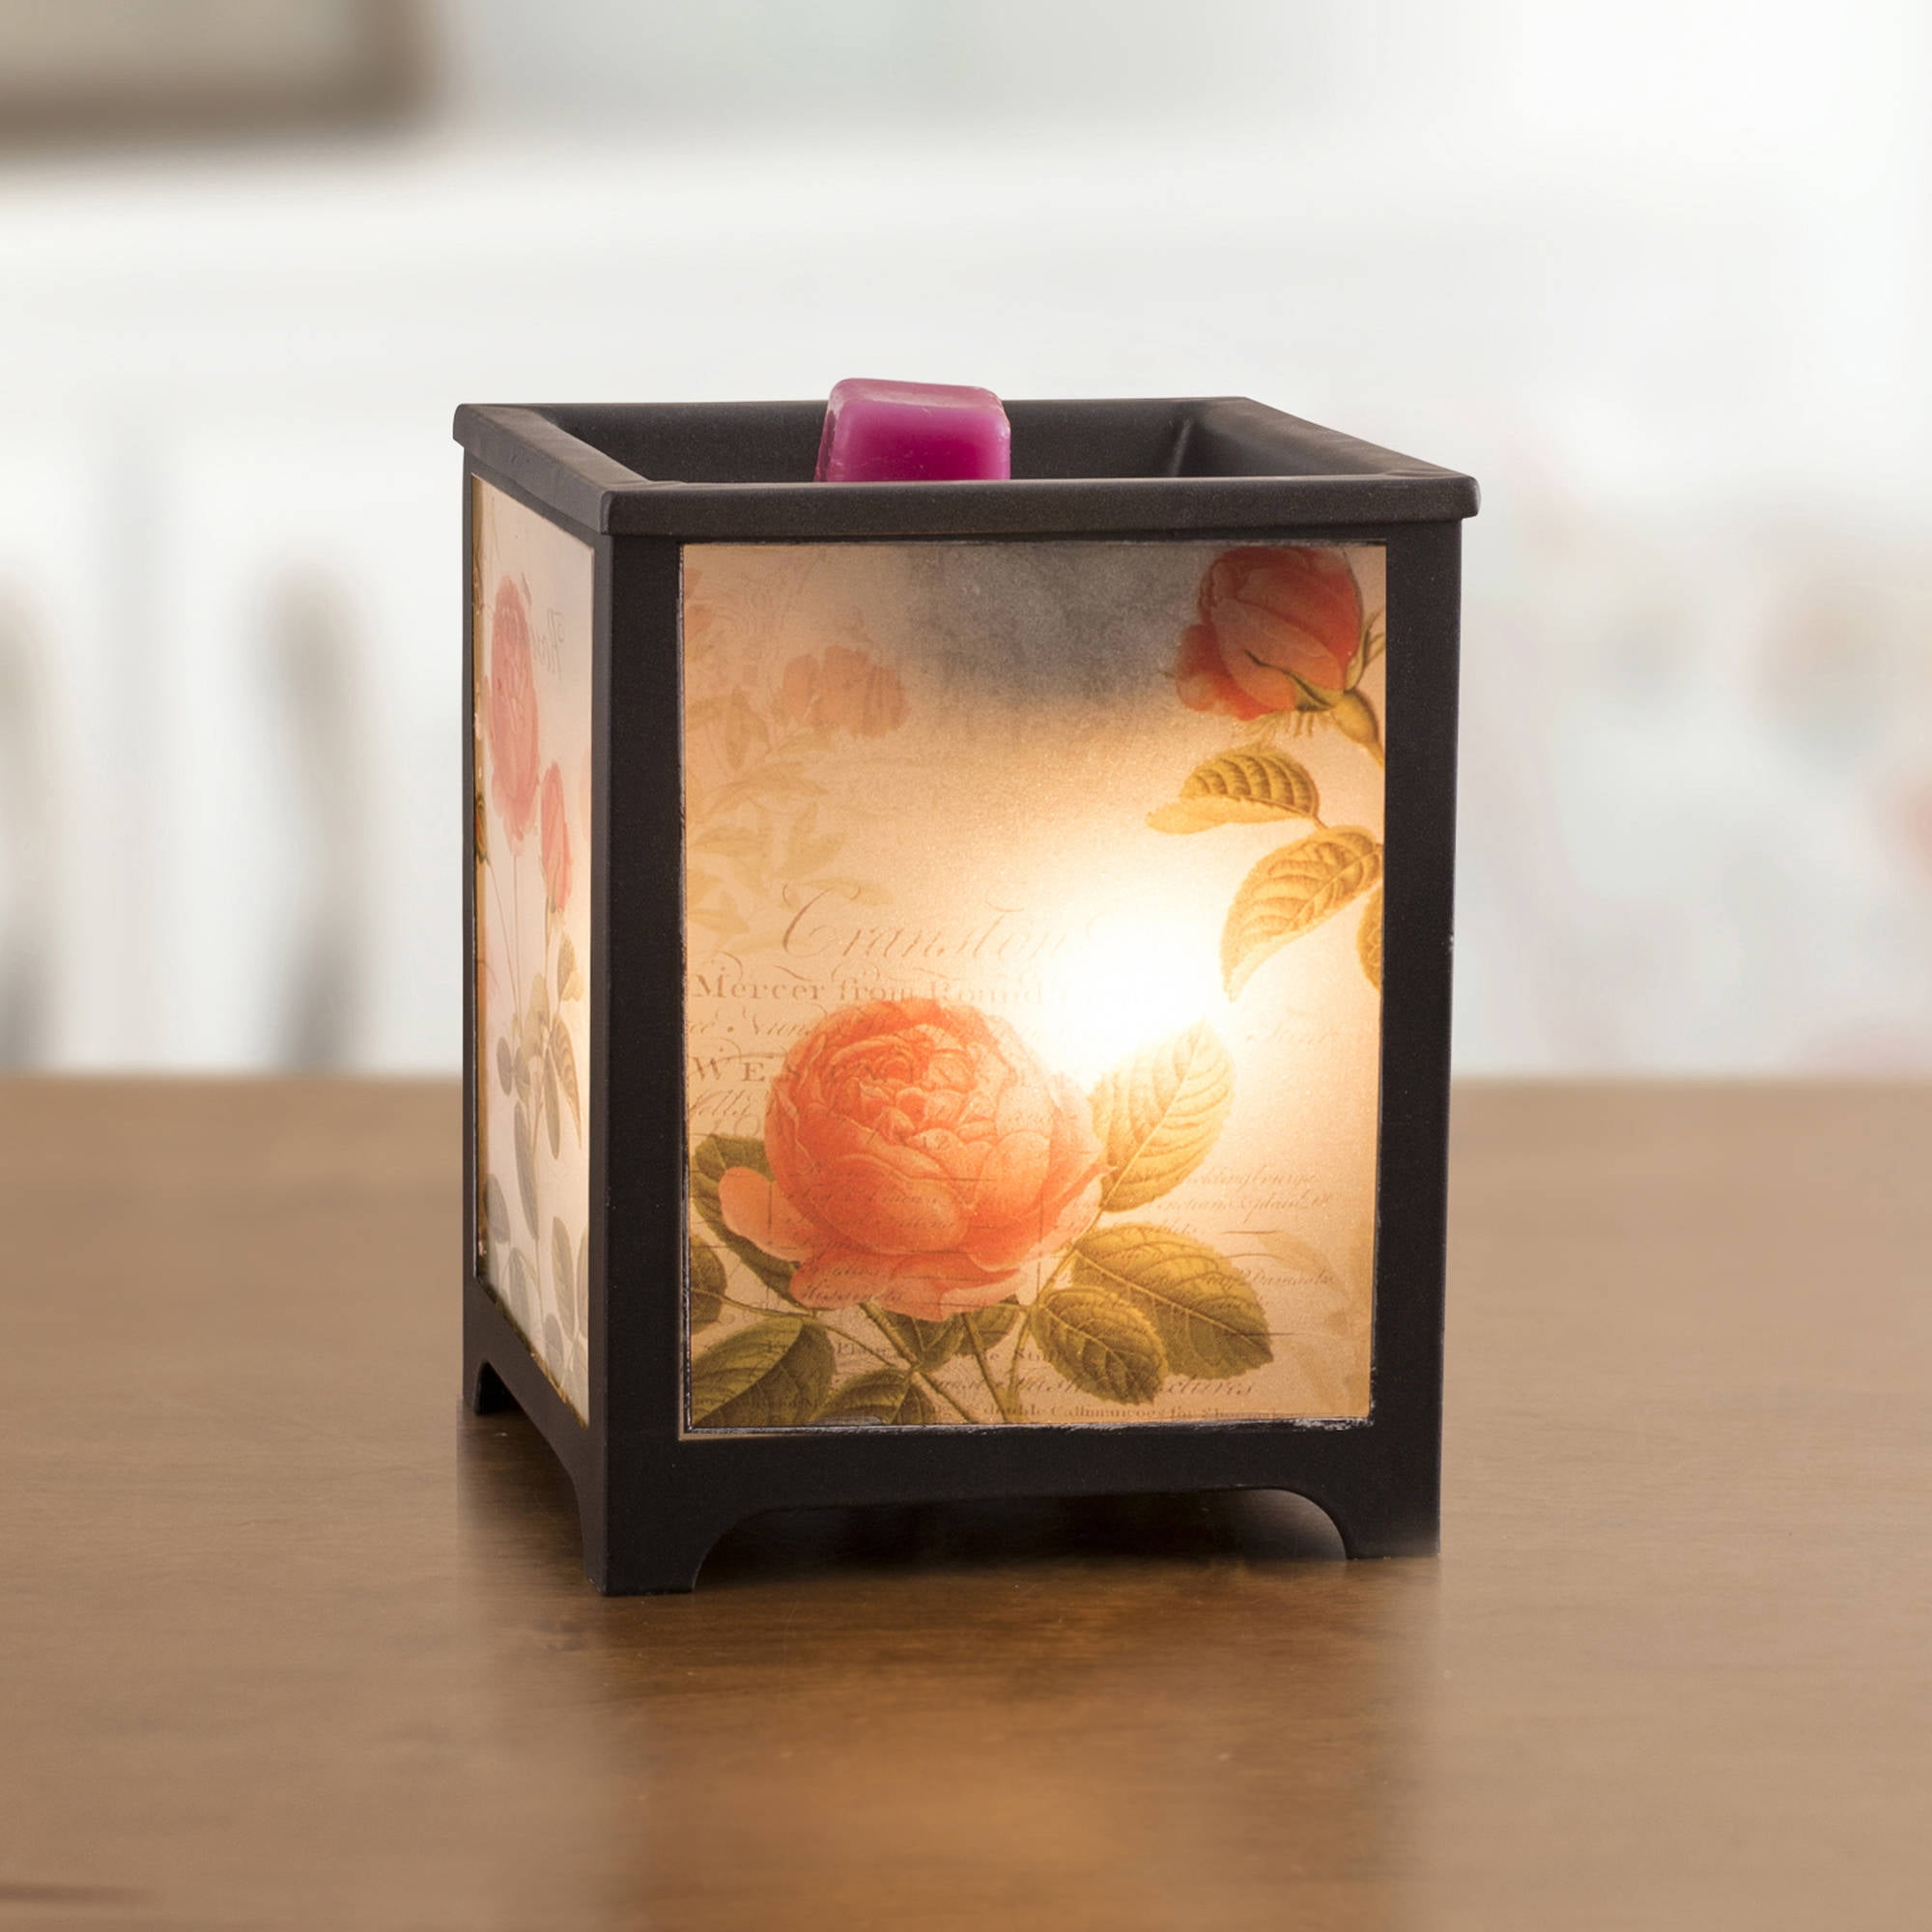 Details about   Tan Floral and Leaves Design 2 in 1 Candle and Tart Warmer 